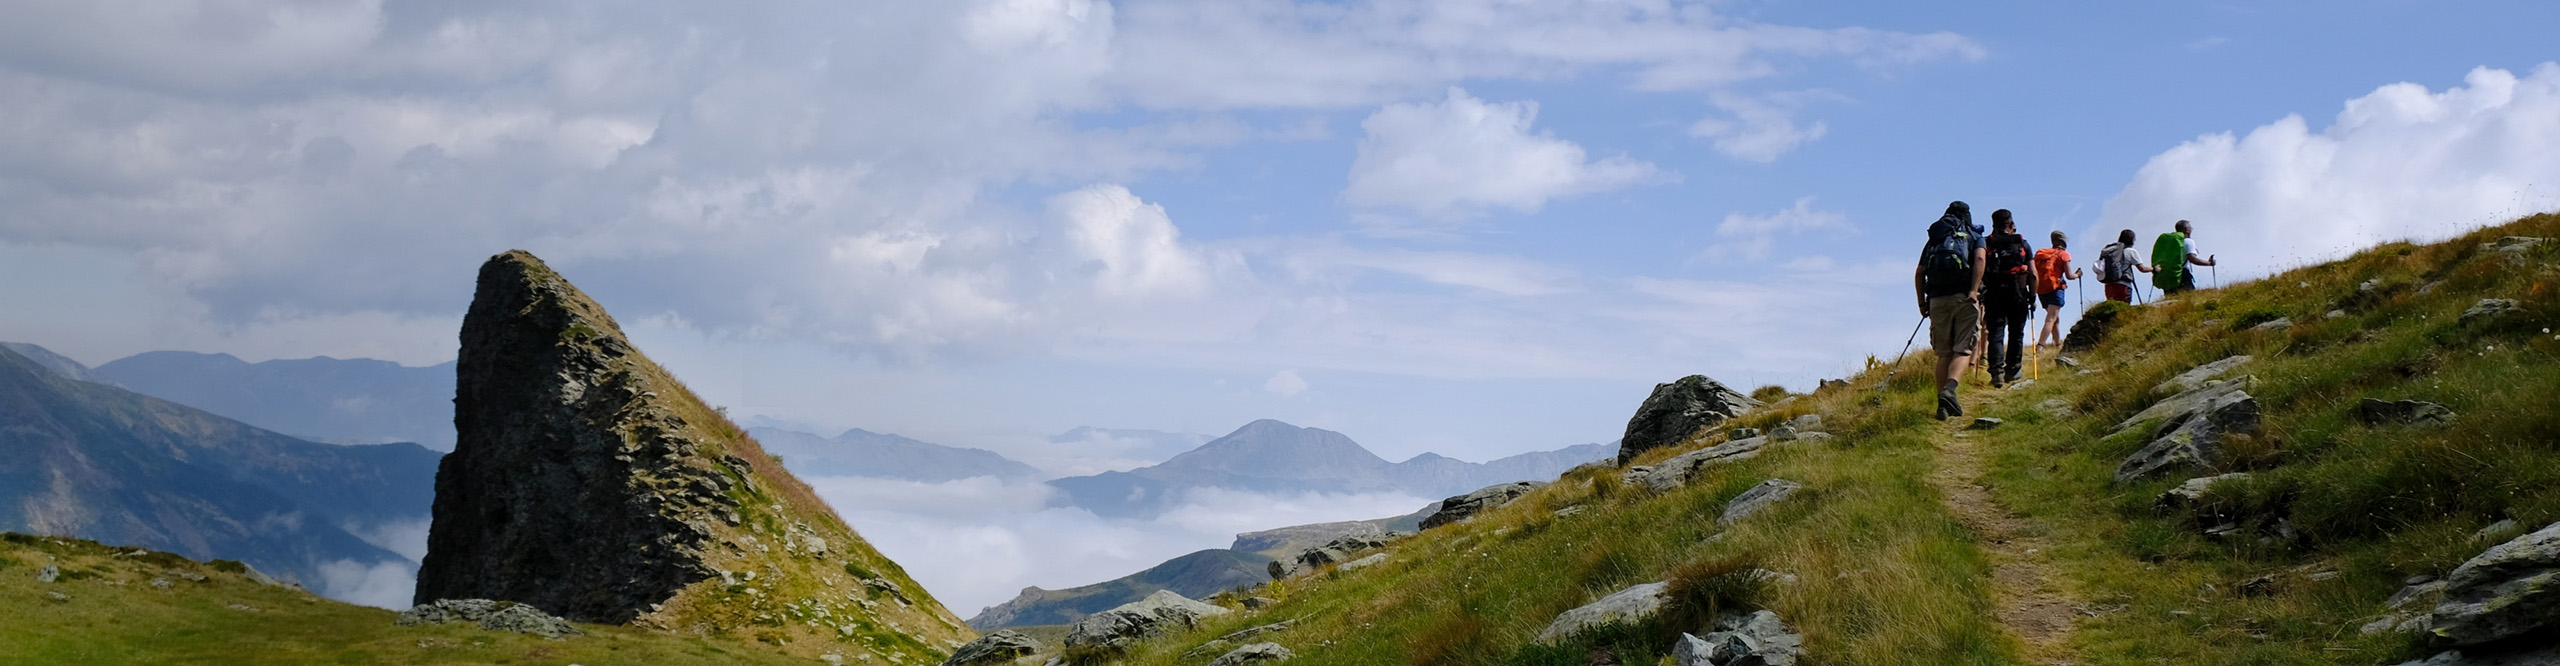 Beautiful mountain view above clouds during hiking on peak Djeravica - the highest peak of Kosovo